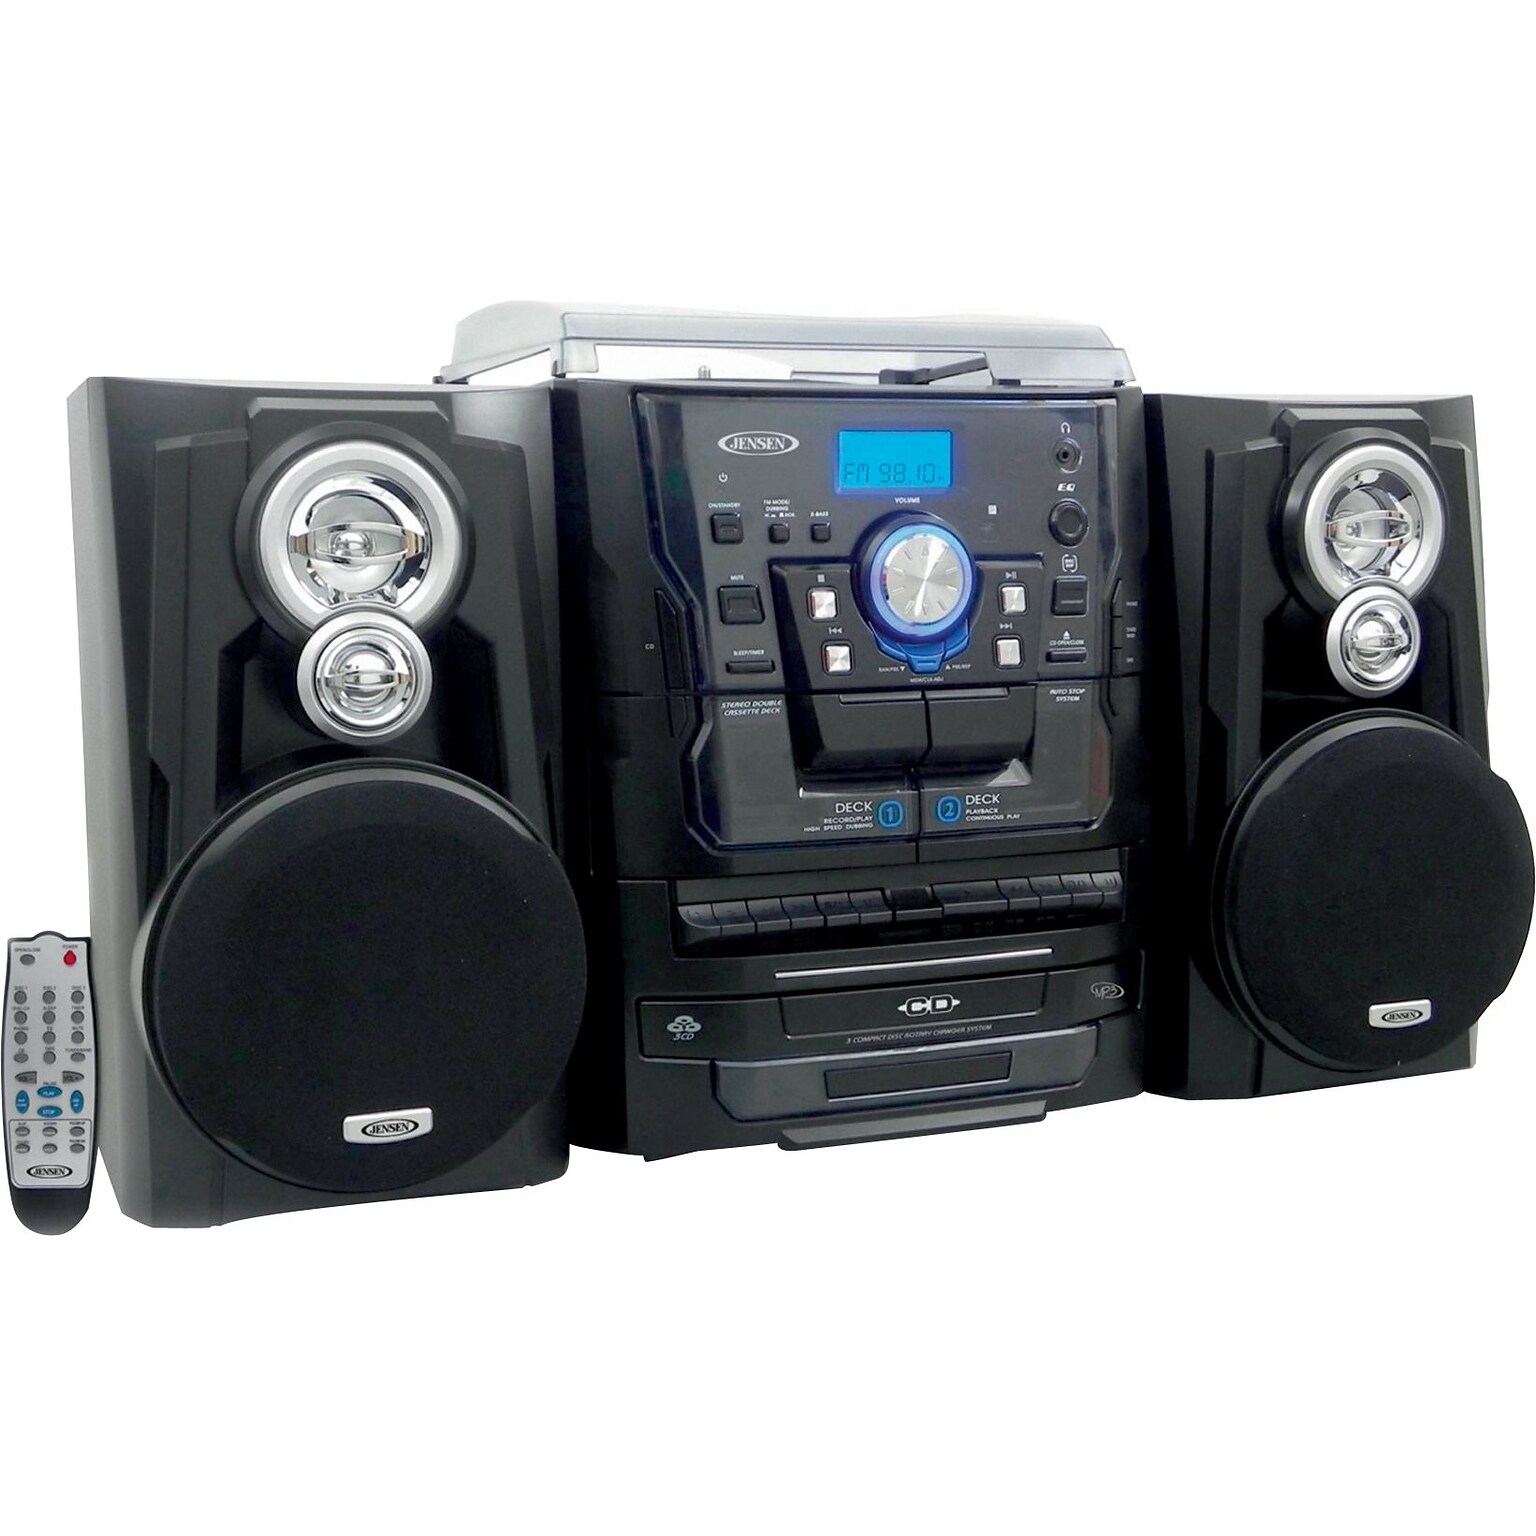 Jensen Bluetooth 3 Speed Stereo Turntable 3 CD Changer and Dual Cassette with Radio